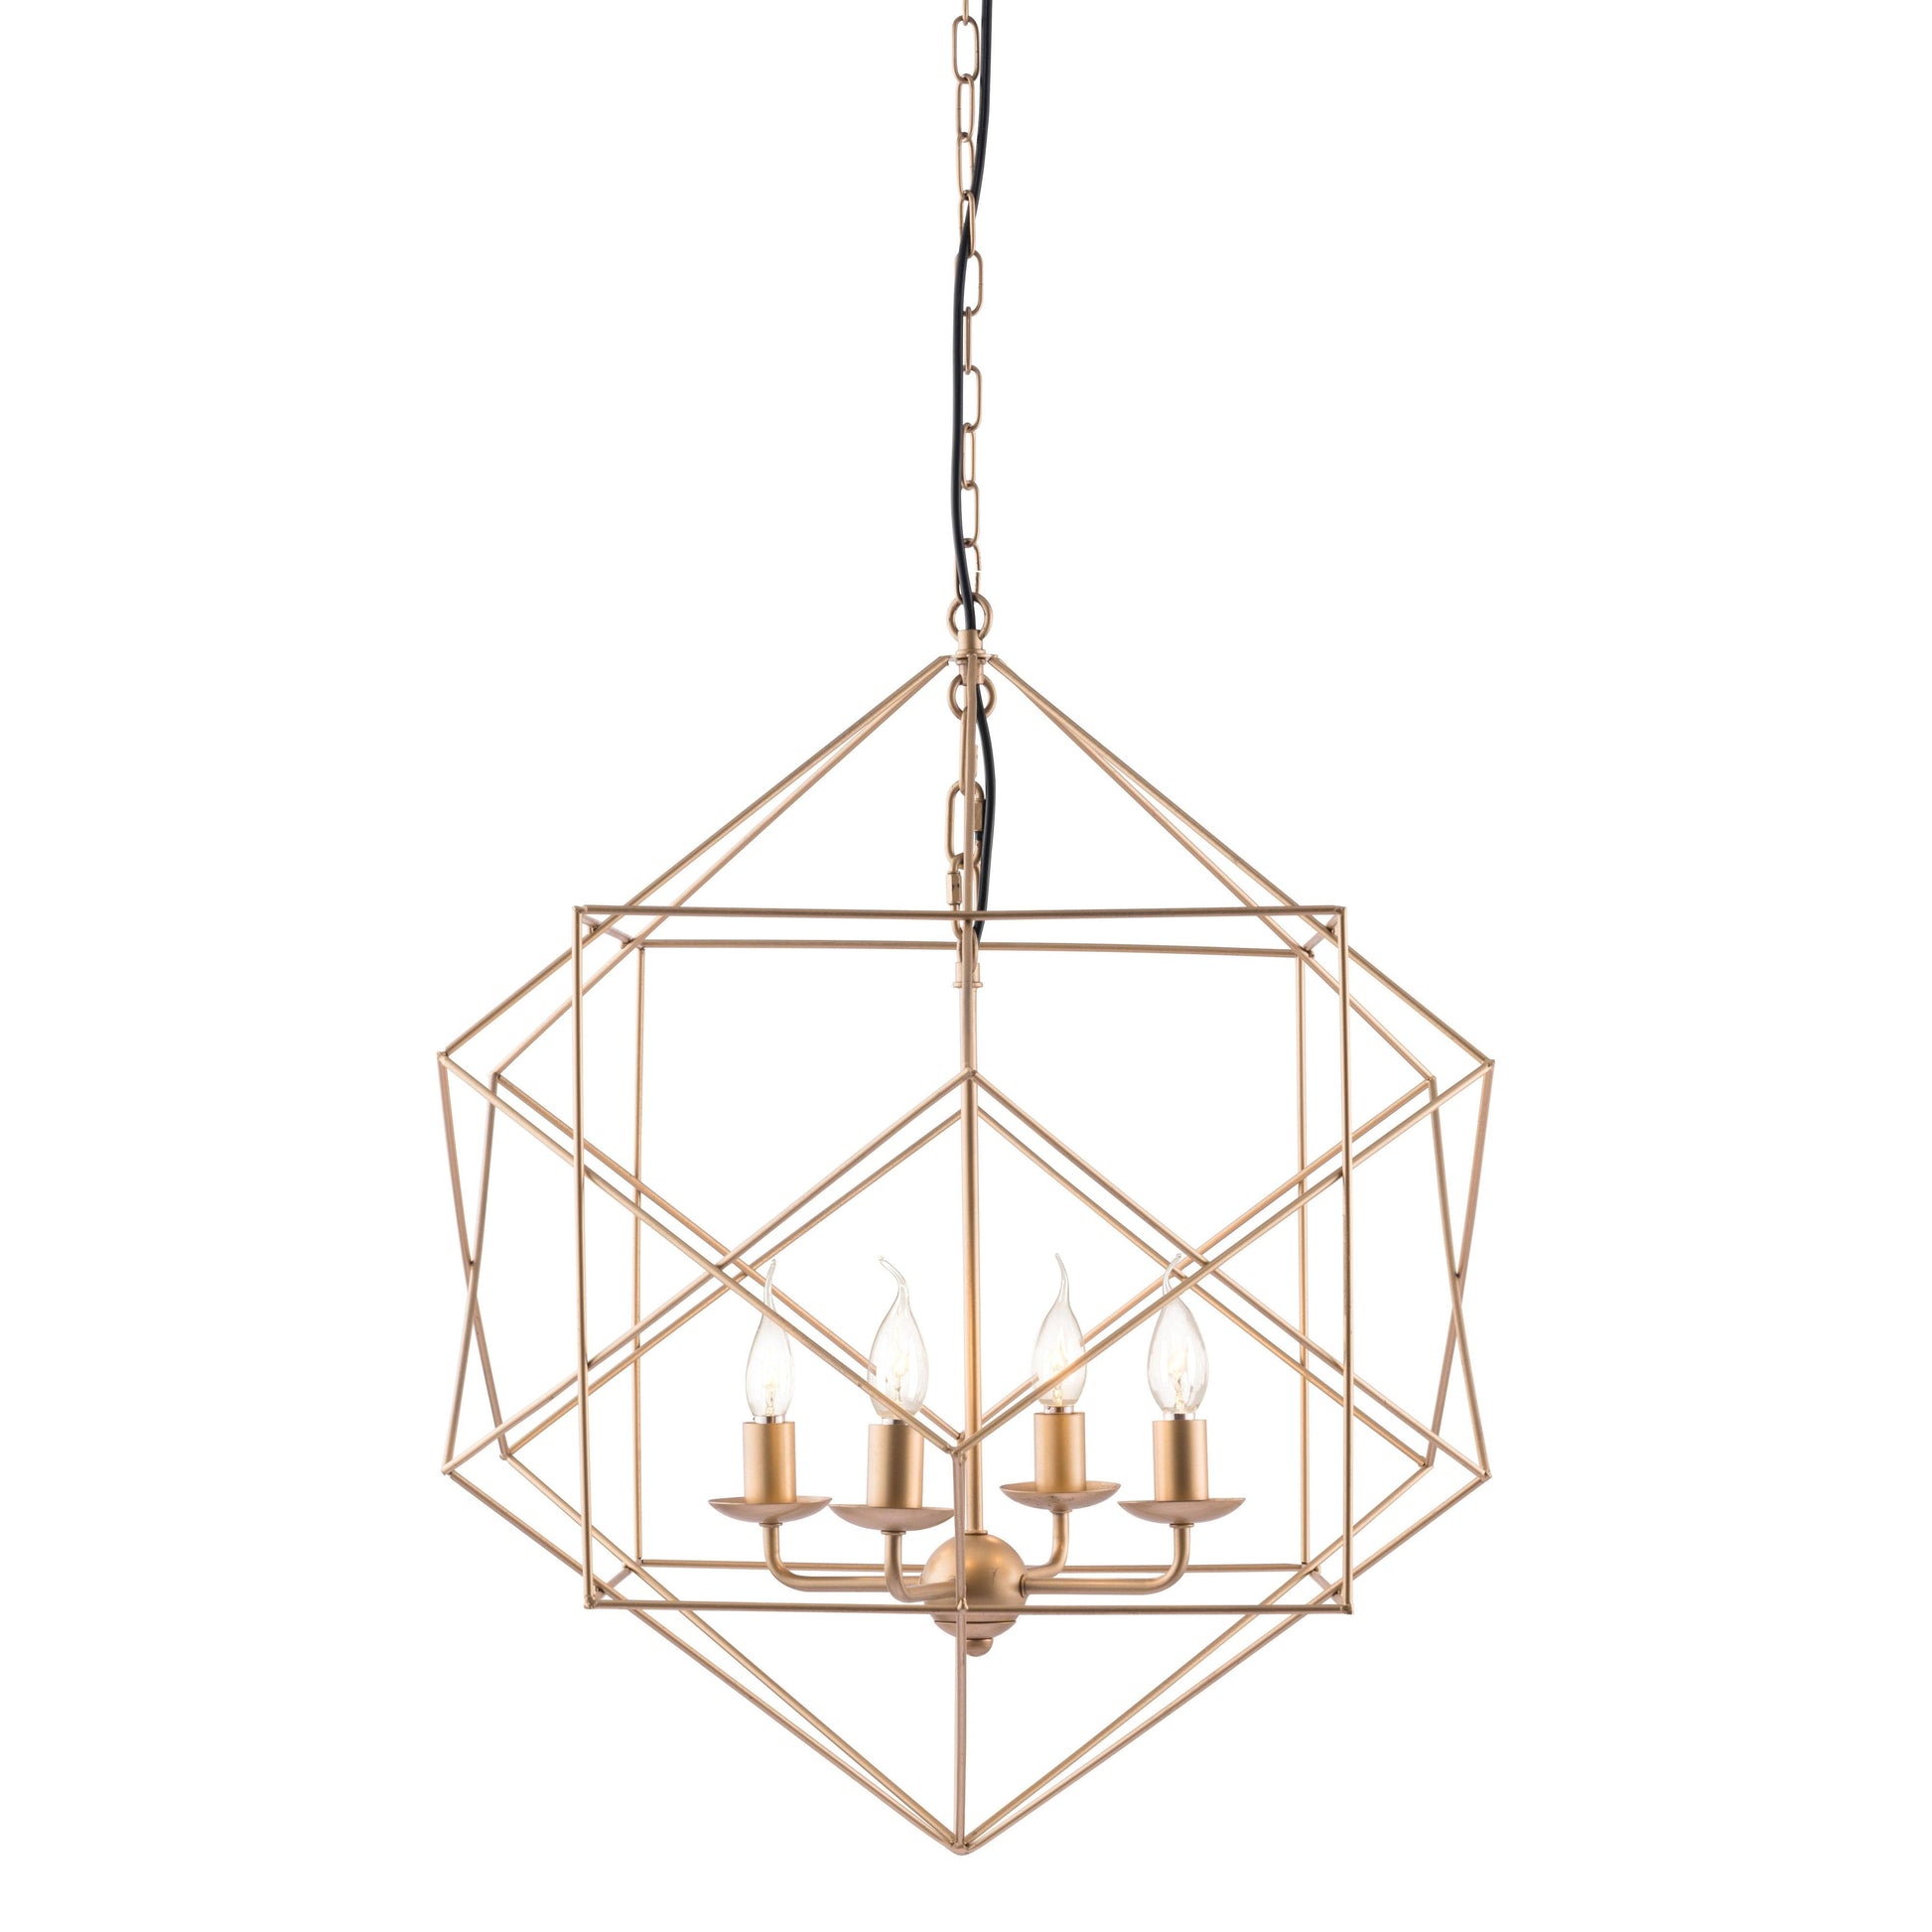 Golden Lighting Pendant Penta Ceiling Lamp Gold - Sideboards and Things Brand_Zuo Modern, Color_Gold, Depth_20-30, Finish_Hand Painted, Height_70-80, Materials_Metal, Metal Type_Steel, Product Type_Pendant, Width_20-30